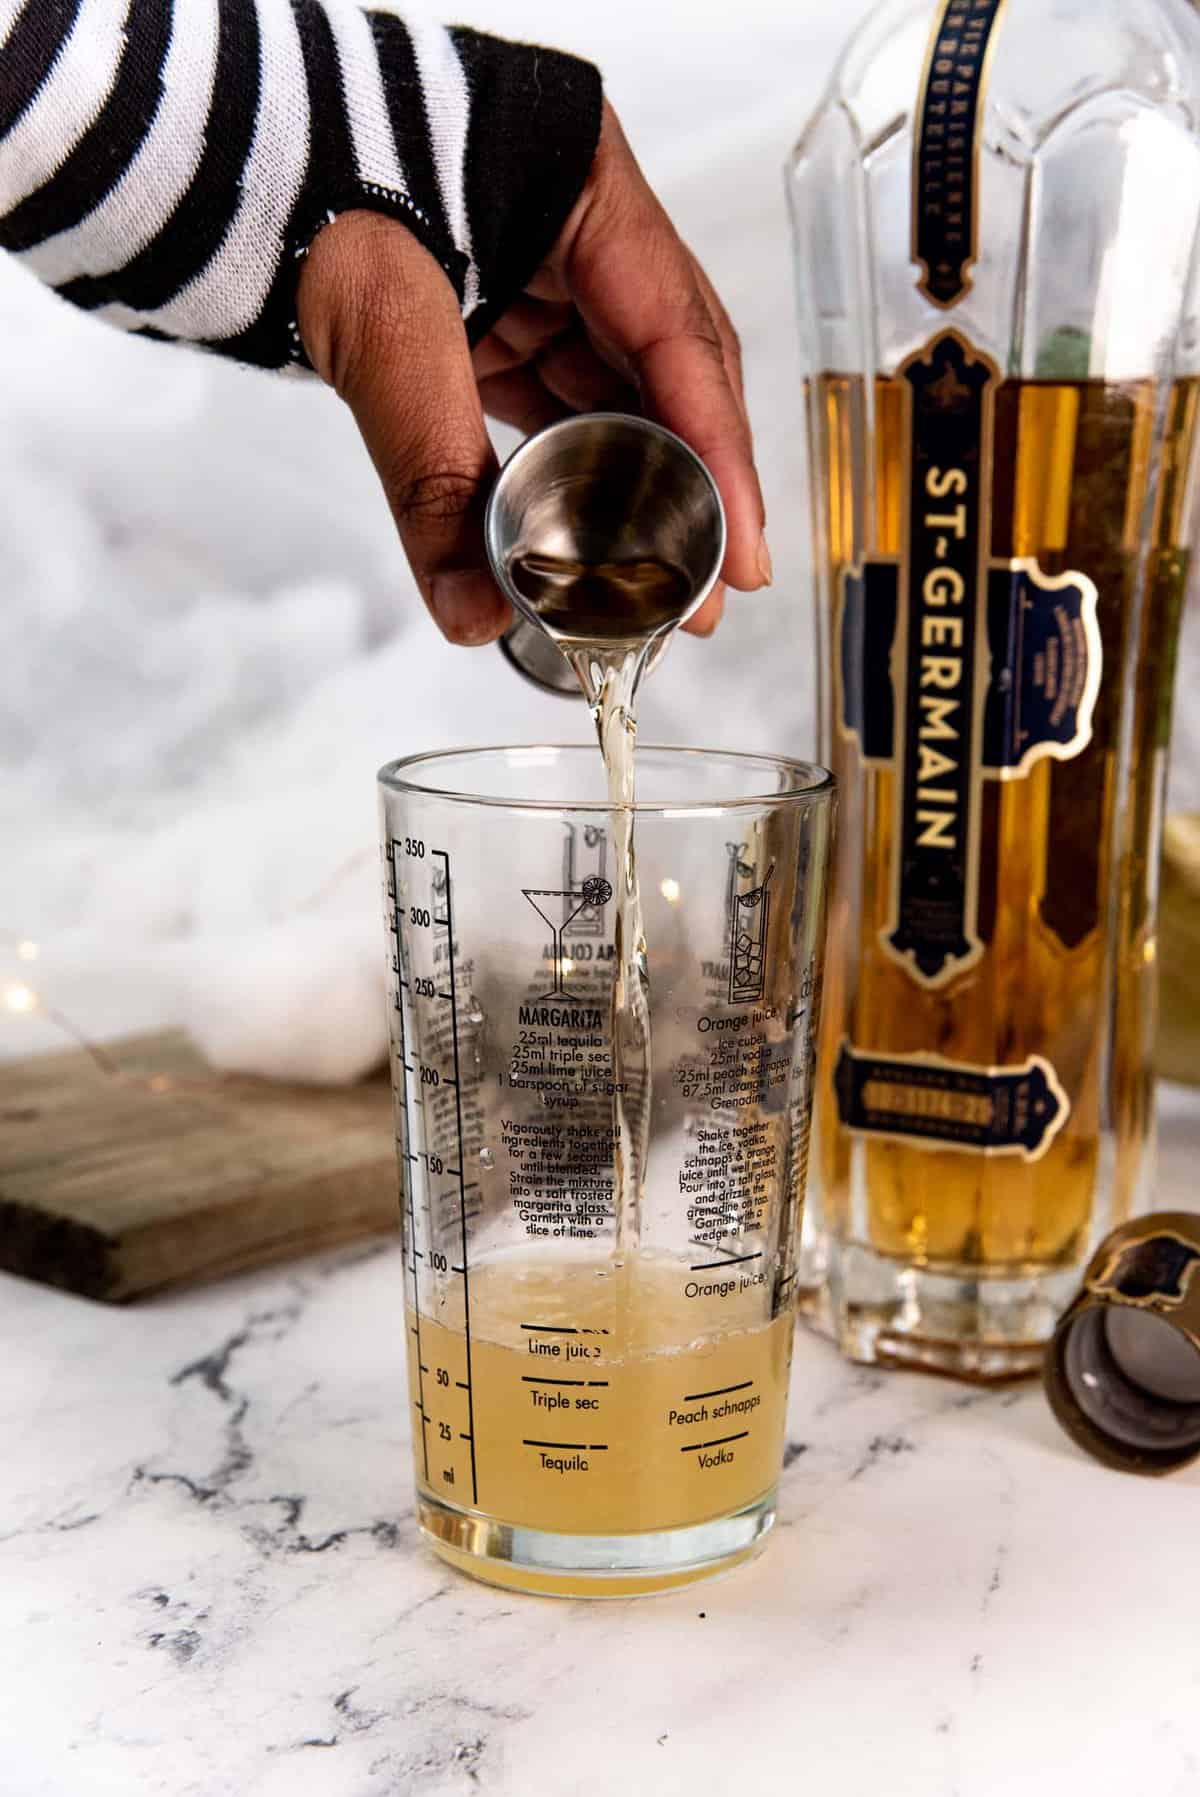 Pouring St Germain liqueur to the cocktail mixing glass, with the bottle in the background.